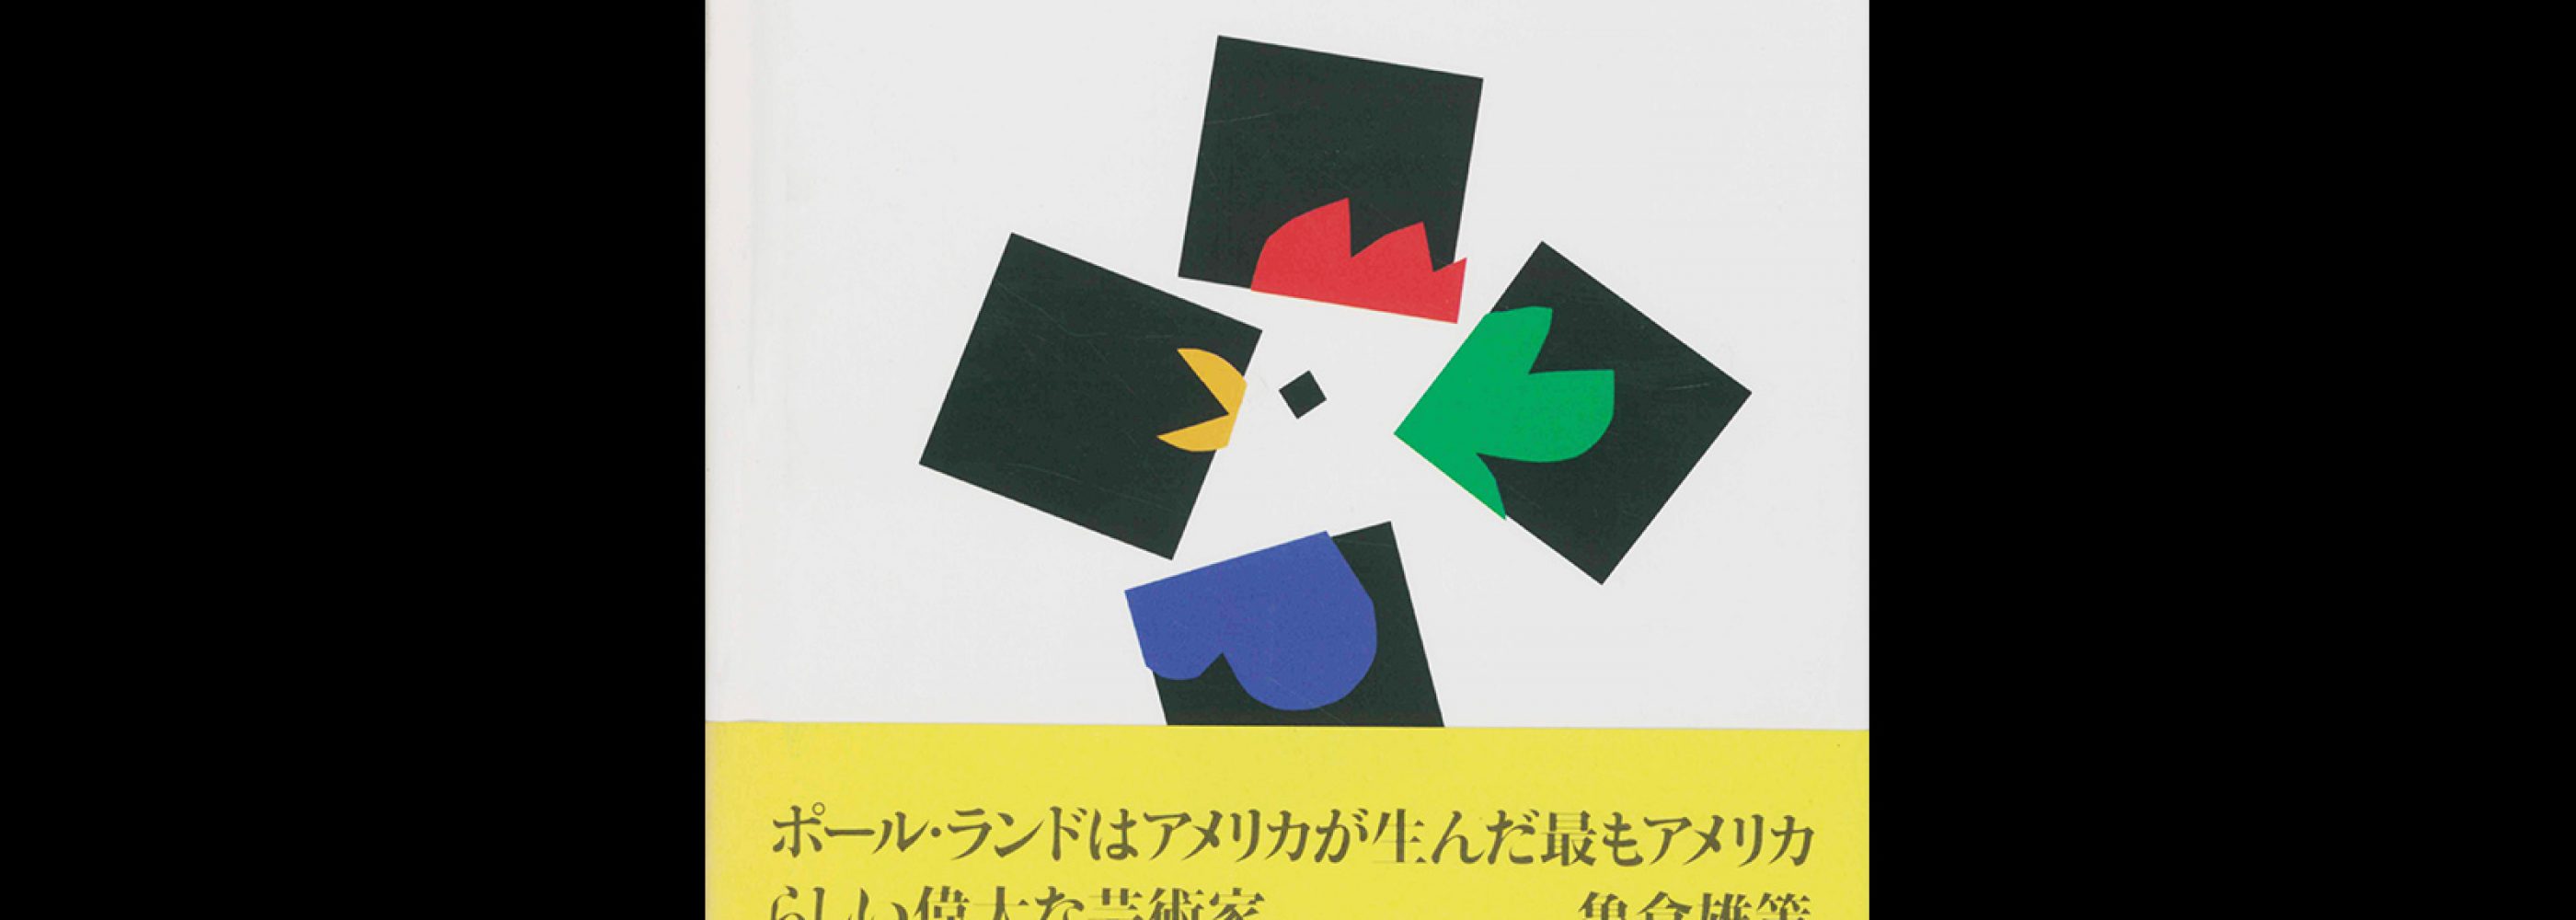 Ginza Graphic Gallery 02, Paul Rand